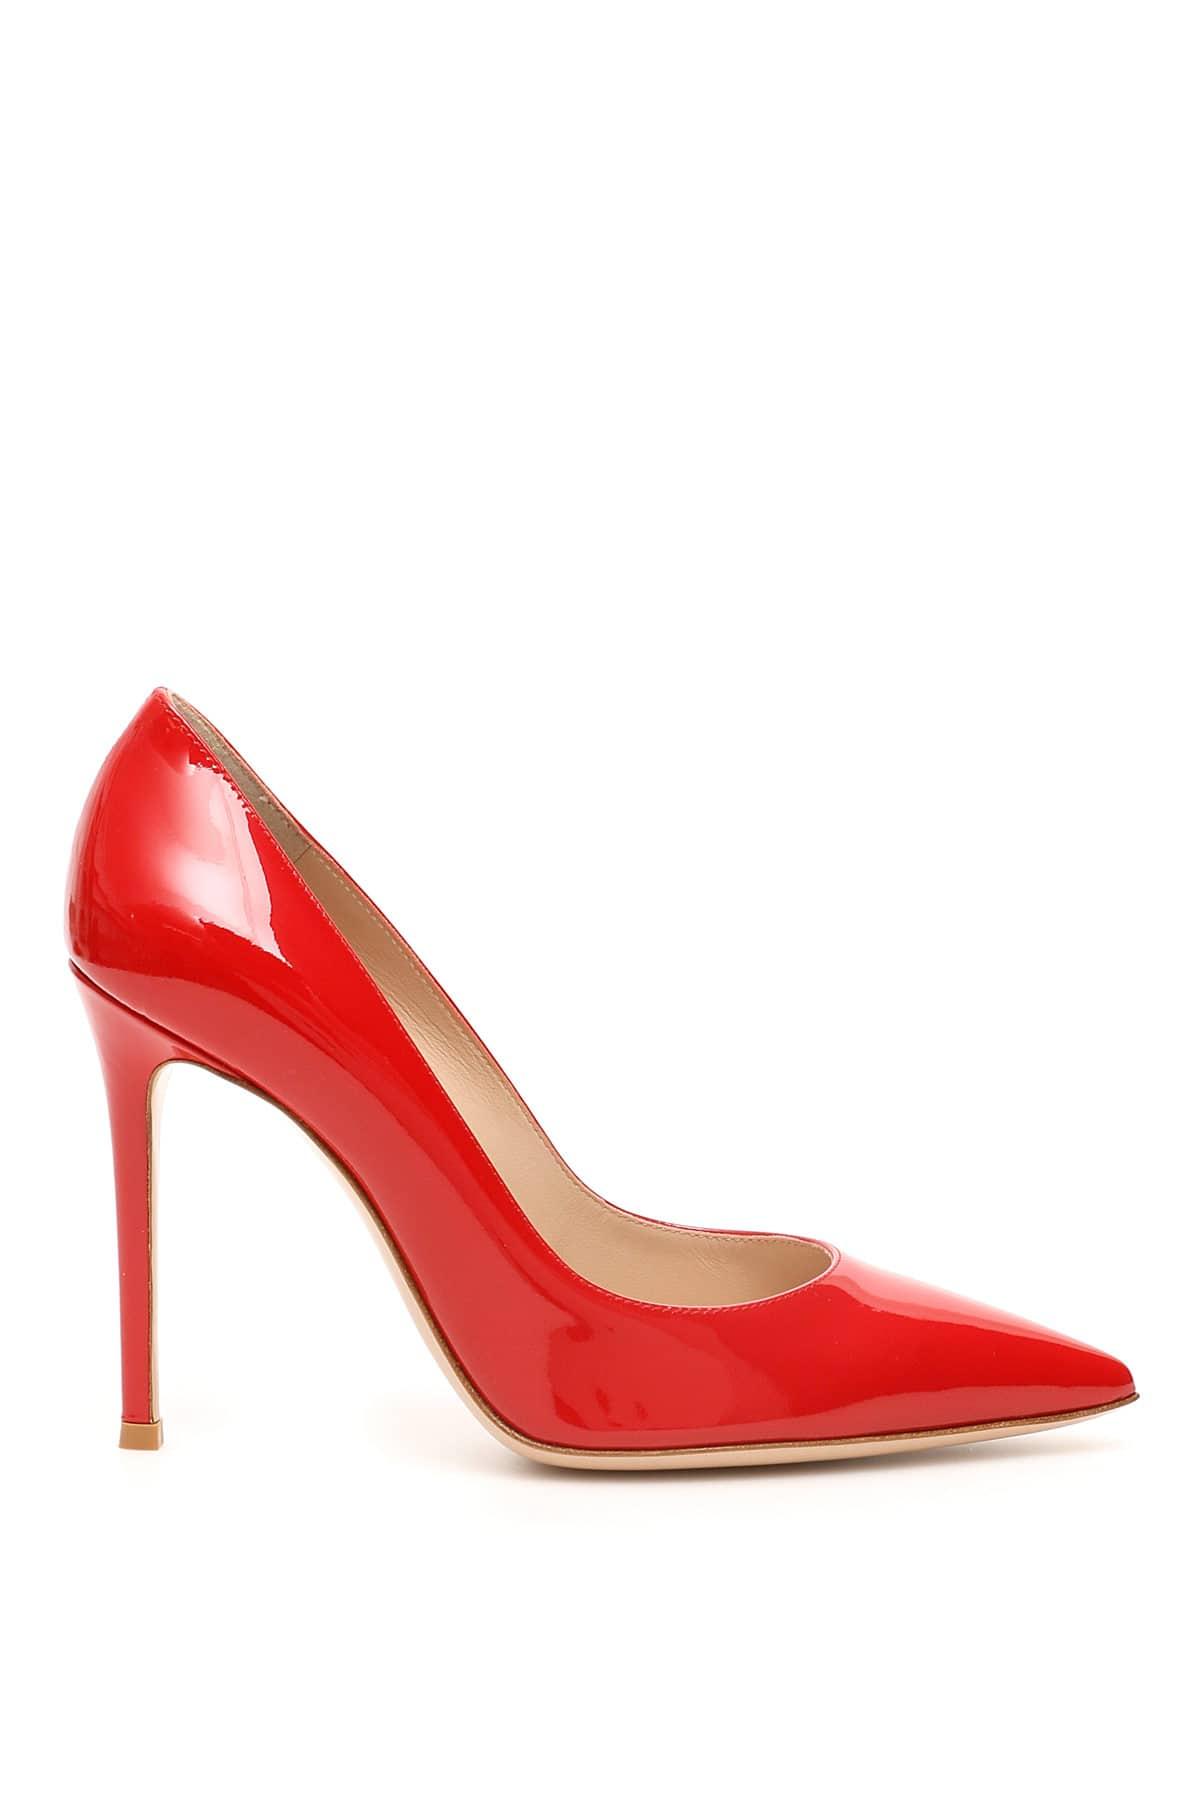 Gianvito Rossi Leather Patent Gianvito 105 Pumps in Red - Lyst